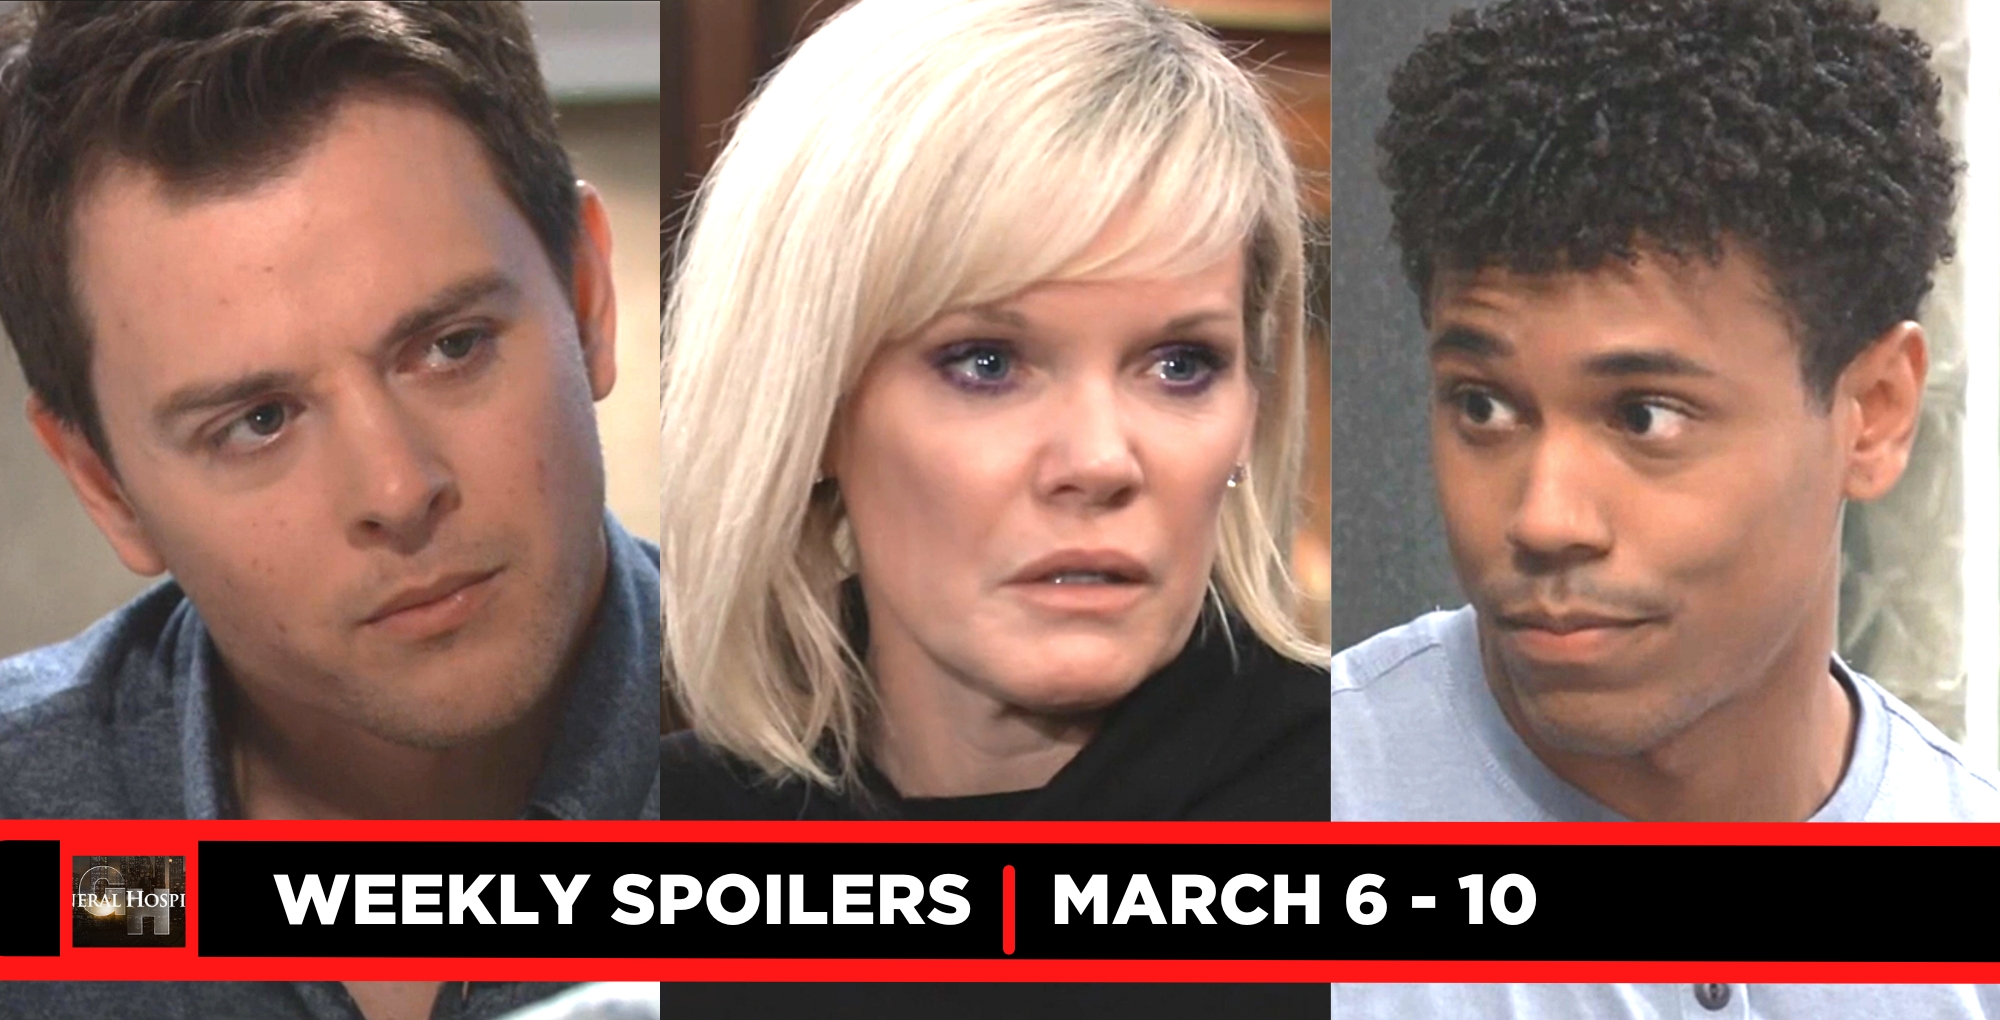 general hospital spoilers for march 6 – march 10, 2023, three images michael, ava, and tj